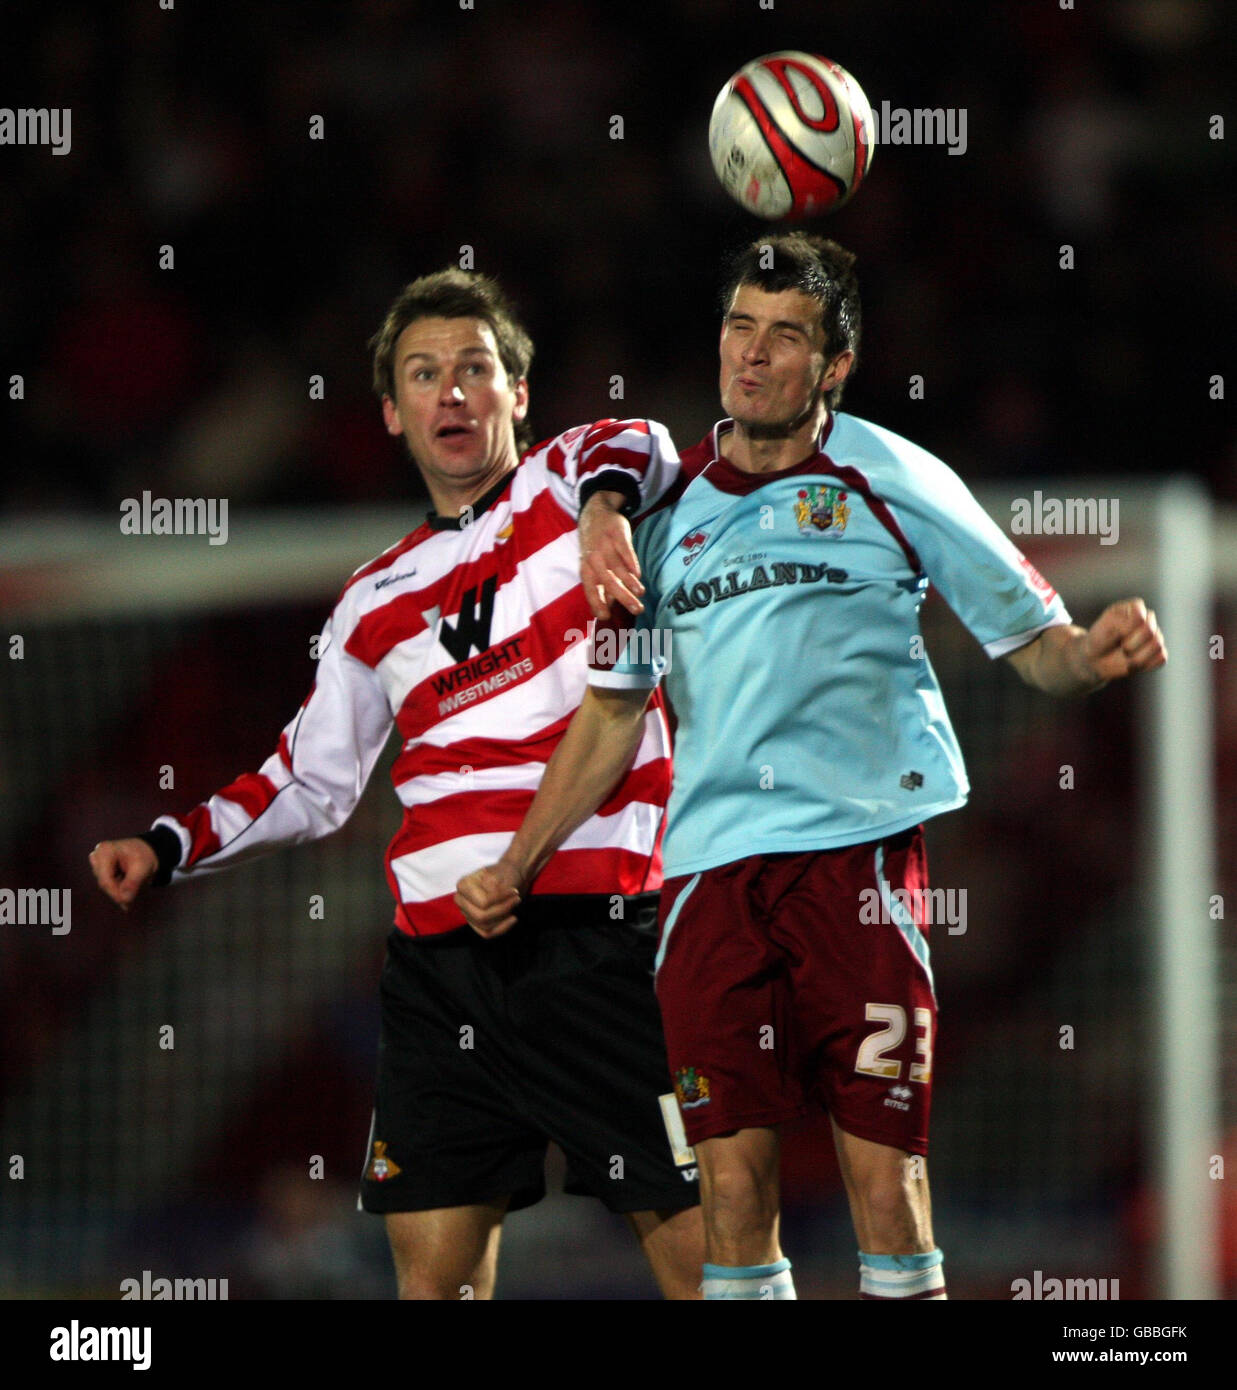 Doncaster Rovers' Gareth Taylor and Burnley's Stephen Jordan battle for the ball during the Coca-Cola Championship match at Keepmoat Stadium, Doncaster. Stock Photo